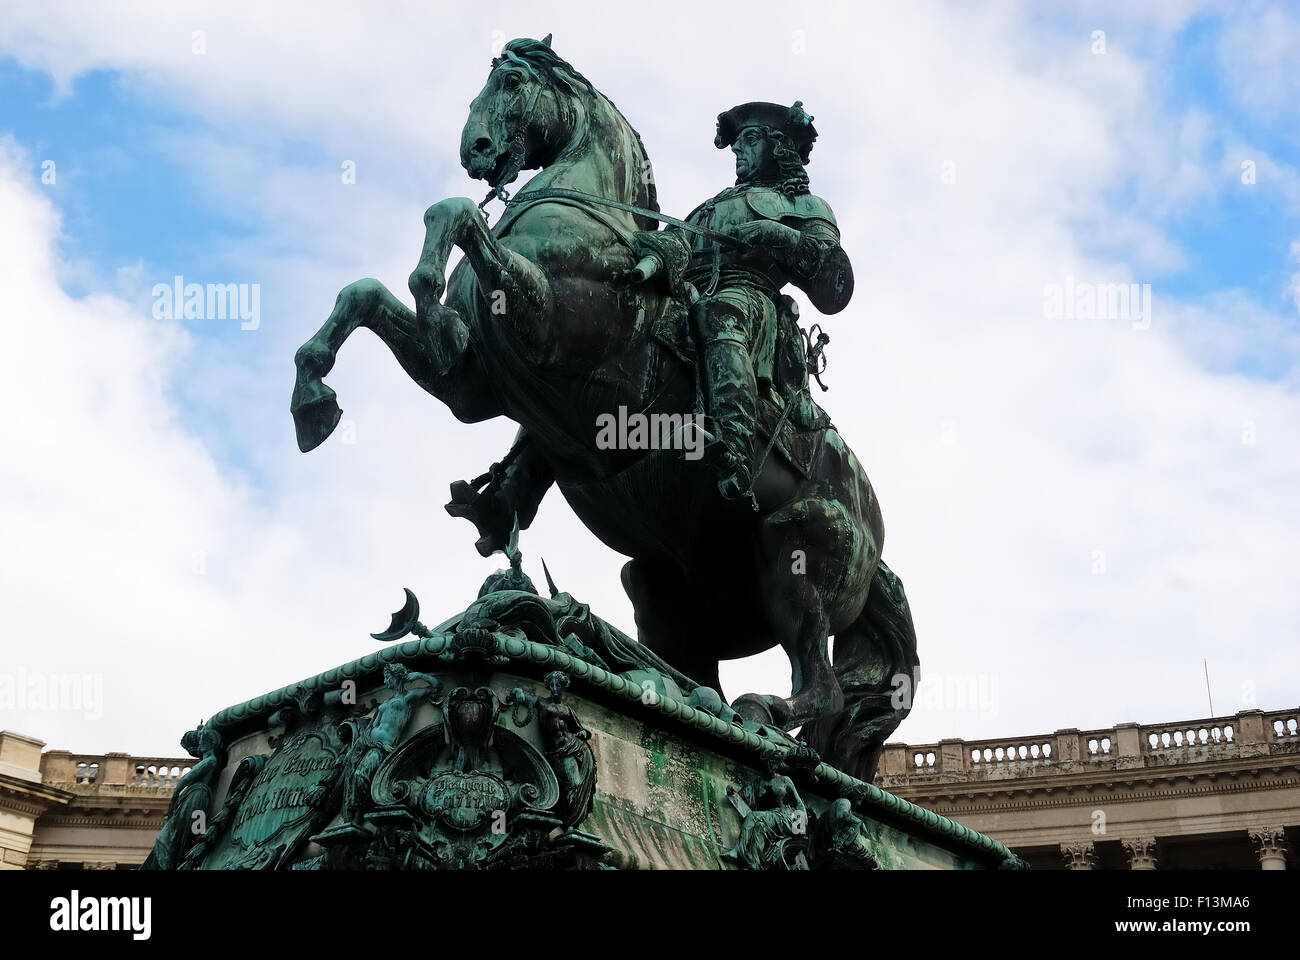 Prince Eugen equestrian statue, Hofburg Imperial Palace, Heldenplatz Heroes Square, Vienna.The Hofburg Palace in Vienna has been the home to ruling families and elected leaders of this country since 1279. Currently, Austria’s president resides in this massive complex of “wings,” which includes the National Library, the Imperial Treasury and the Spanish Riding School. Construction of the palace stretched from the 13th to the 20th centuries, making it one of the most architecturally diverse buildings in Europe. Stock Photo